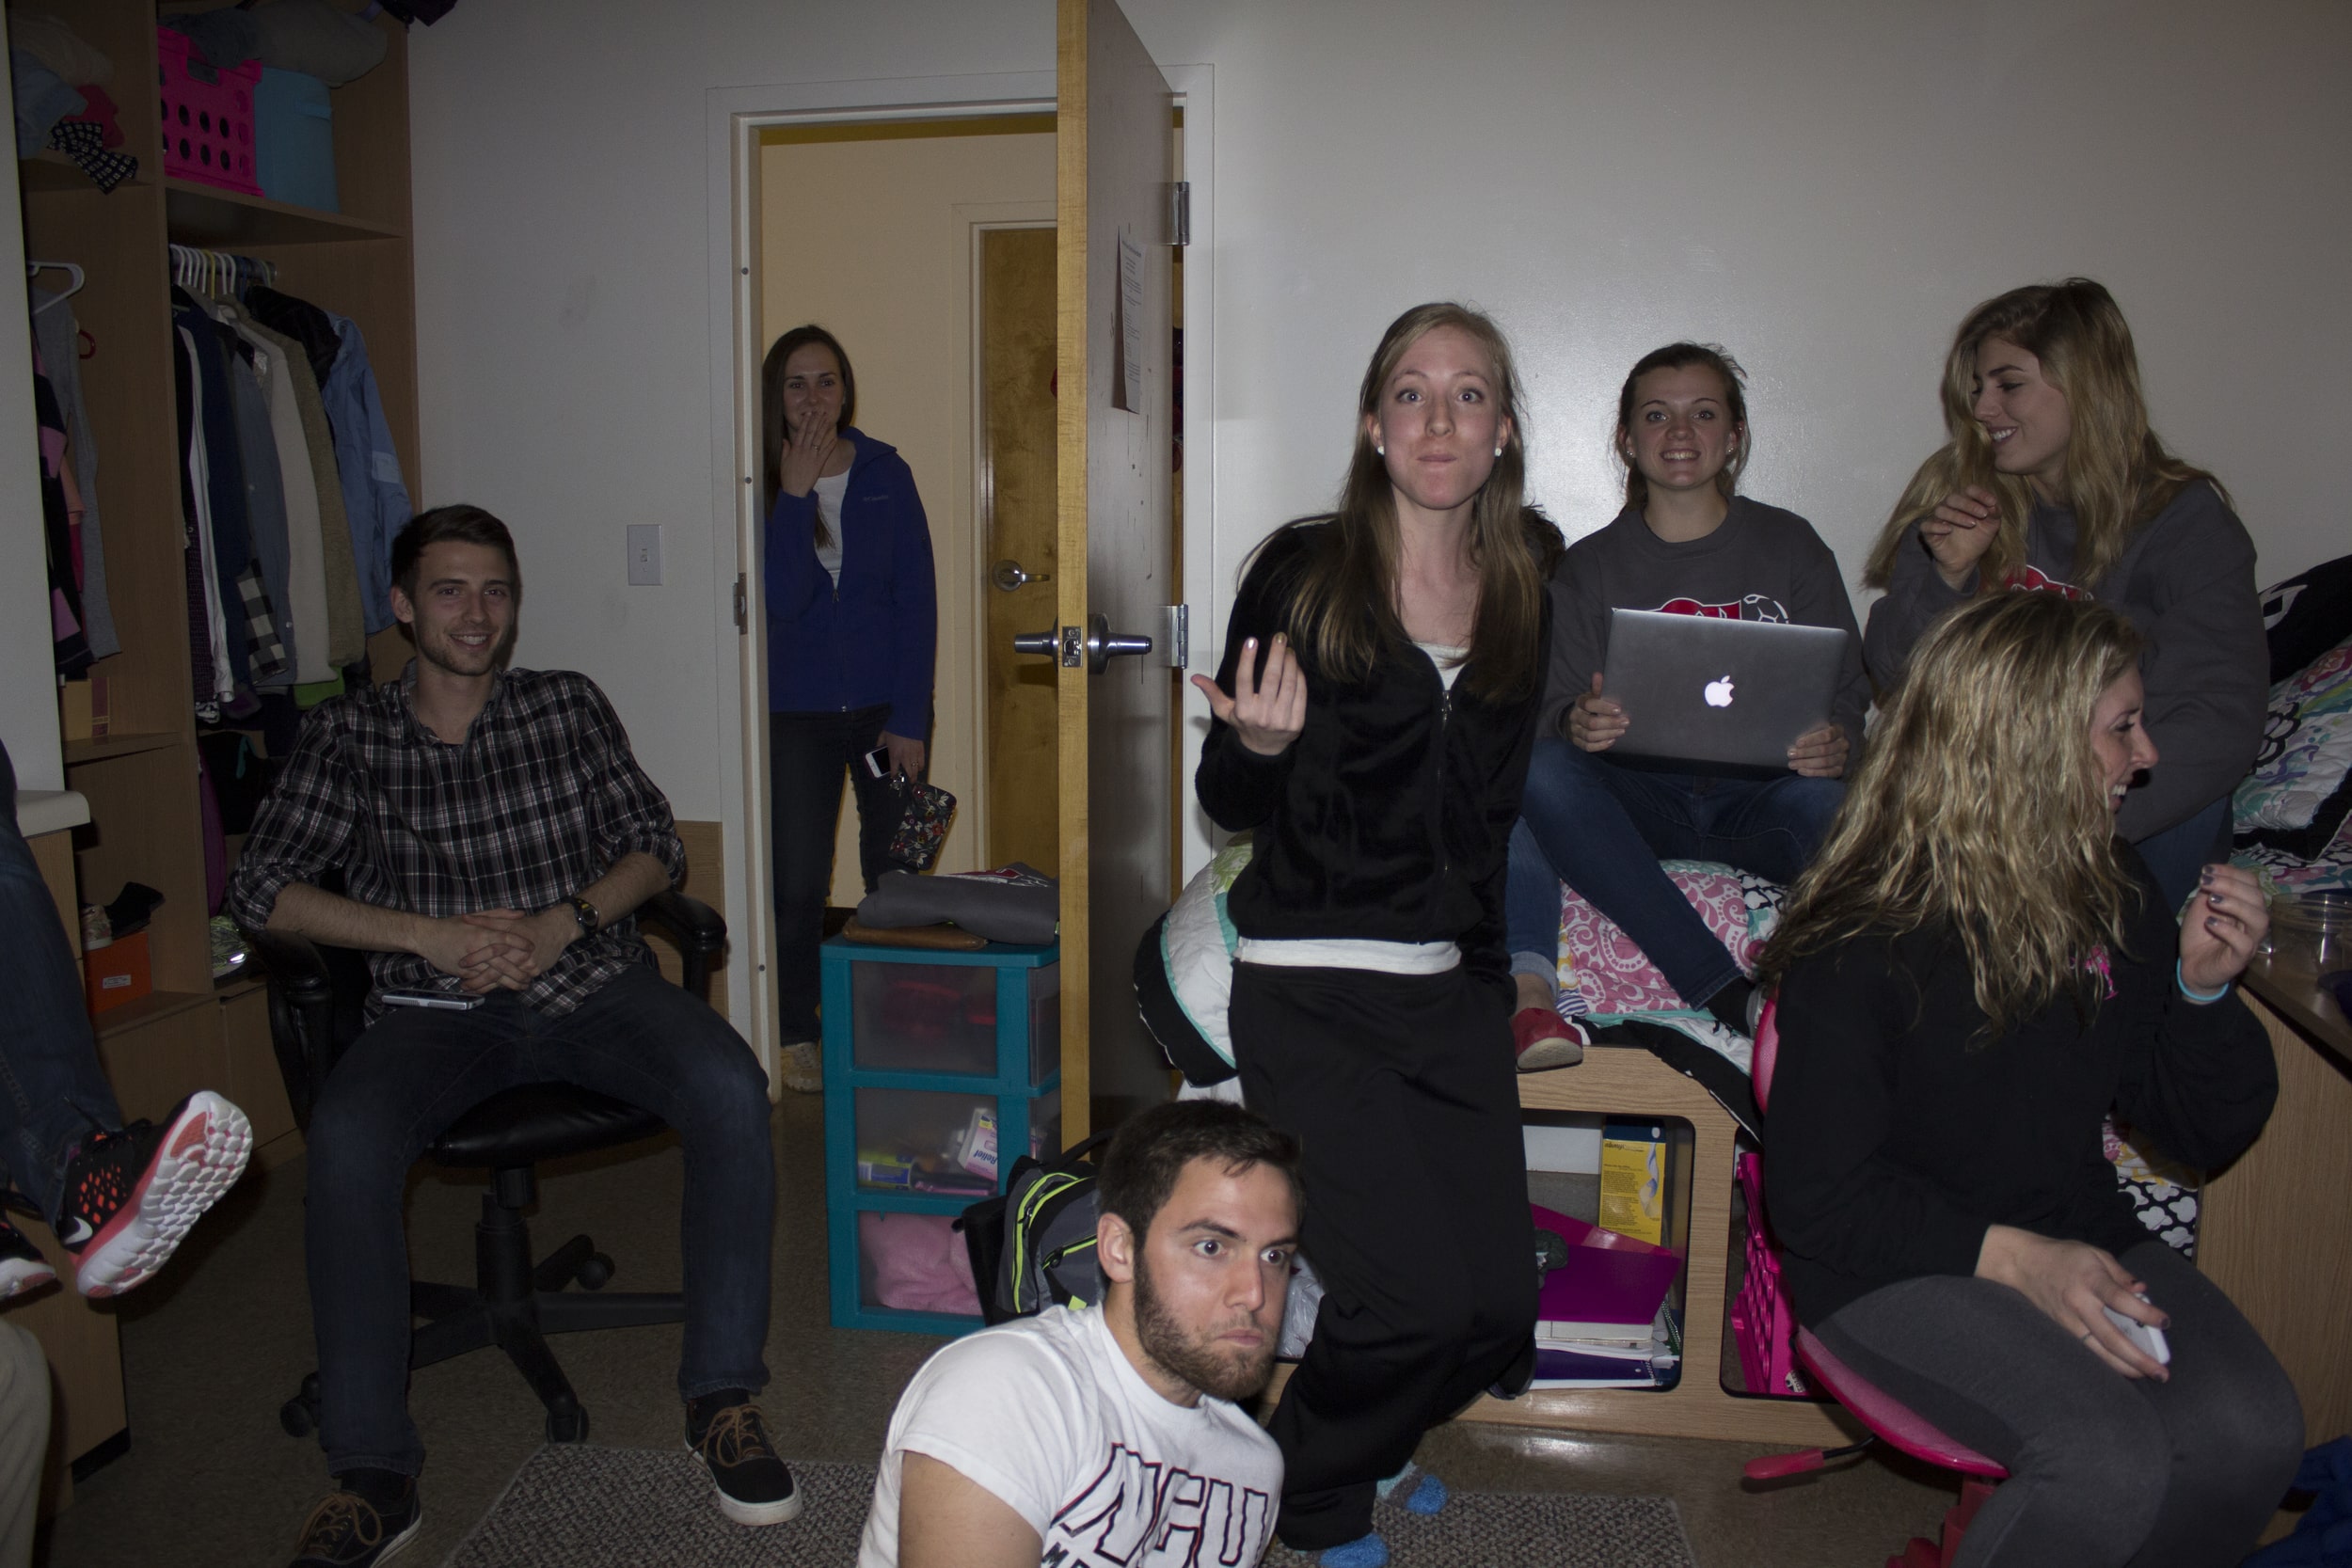  Others enjoy getting together and having the chance to be able to watch a movie together inside a dorm room on comfortable seats, such as the beds inside the room. Sophomore Marie Fout invited some of her friends to her room to watch a movie togethe